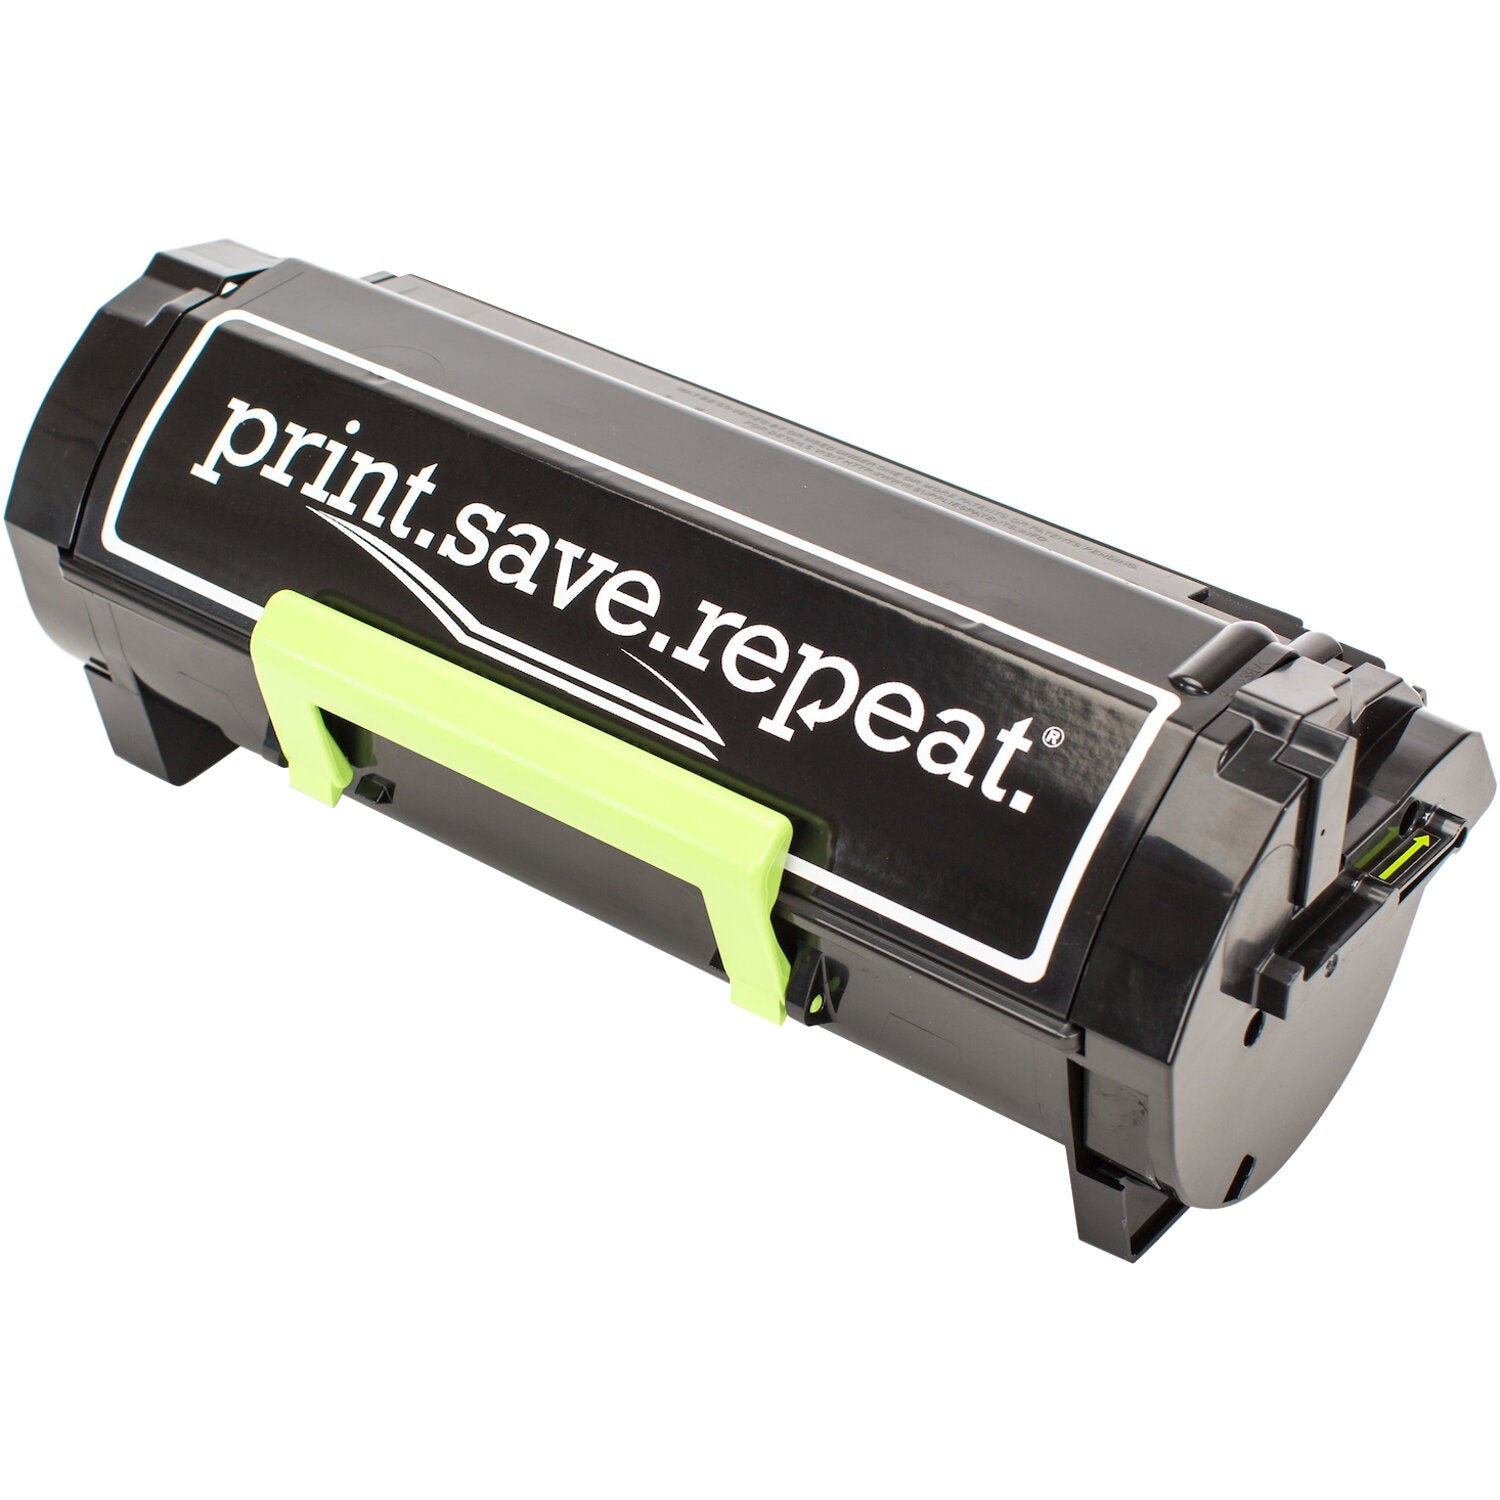 Print.Save.Repeat. Lexmark 501 Remanufactured Toner Cartridge (50F1000) for MS310, MS312, MS315, MS410, MS415, MS510, MS610 [1,500 Pages]